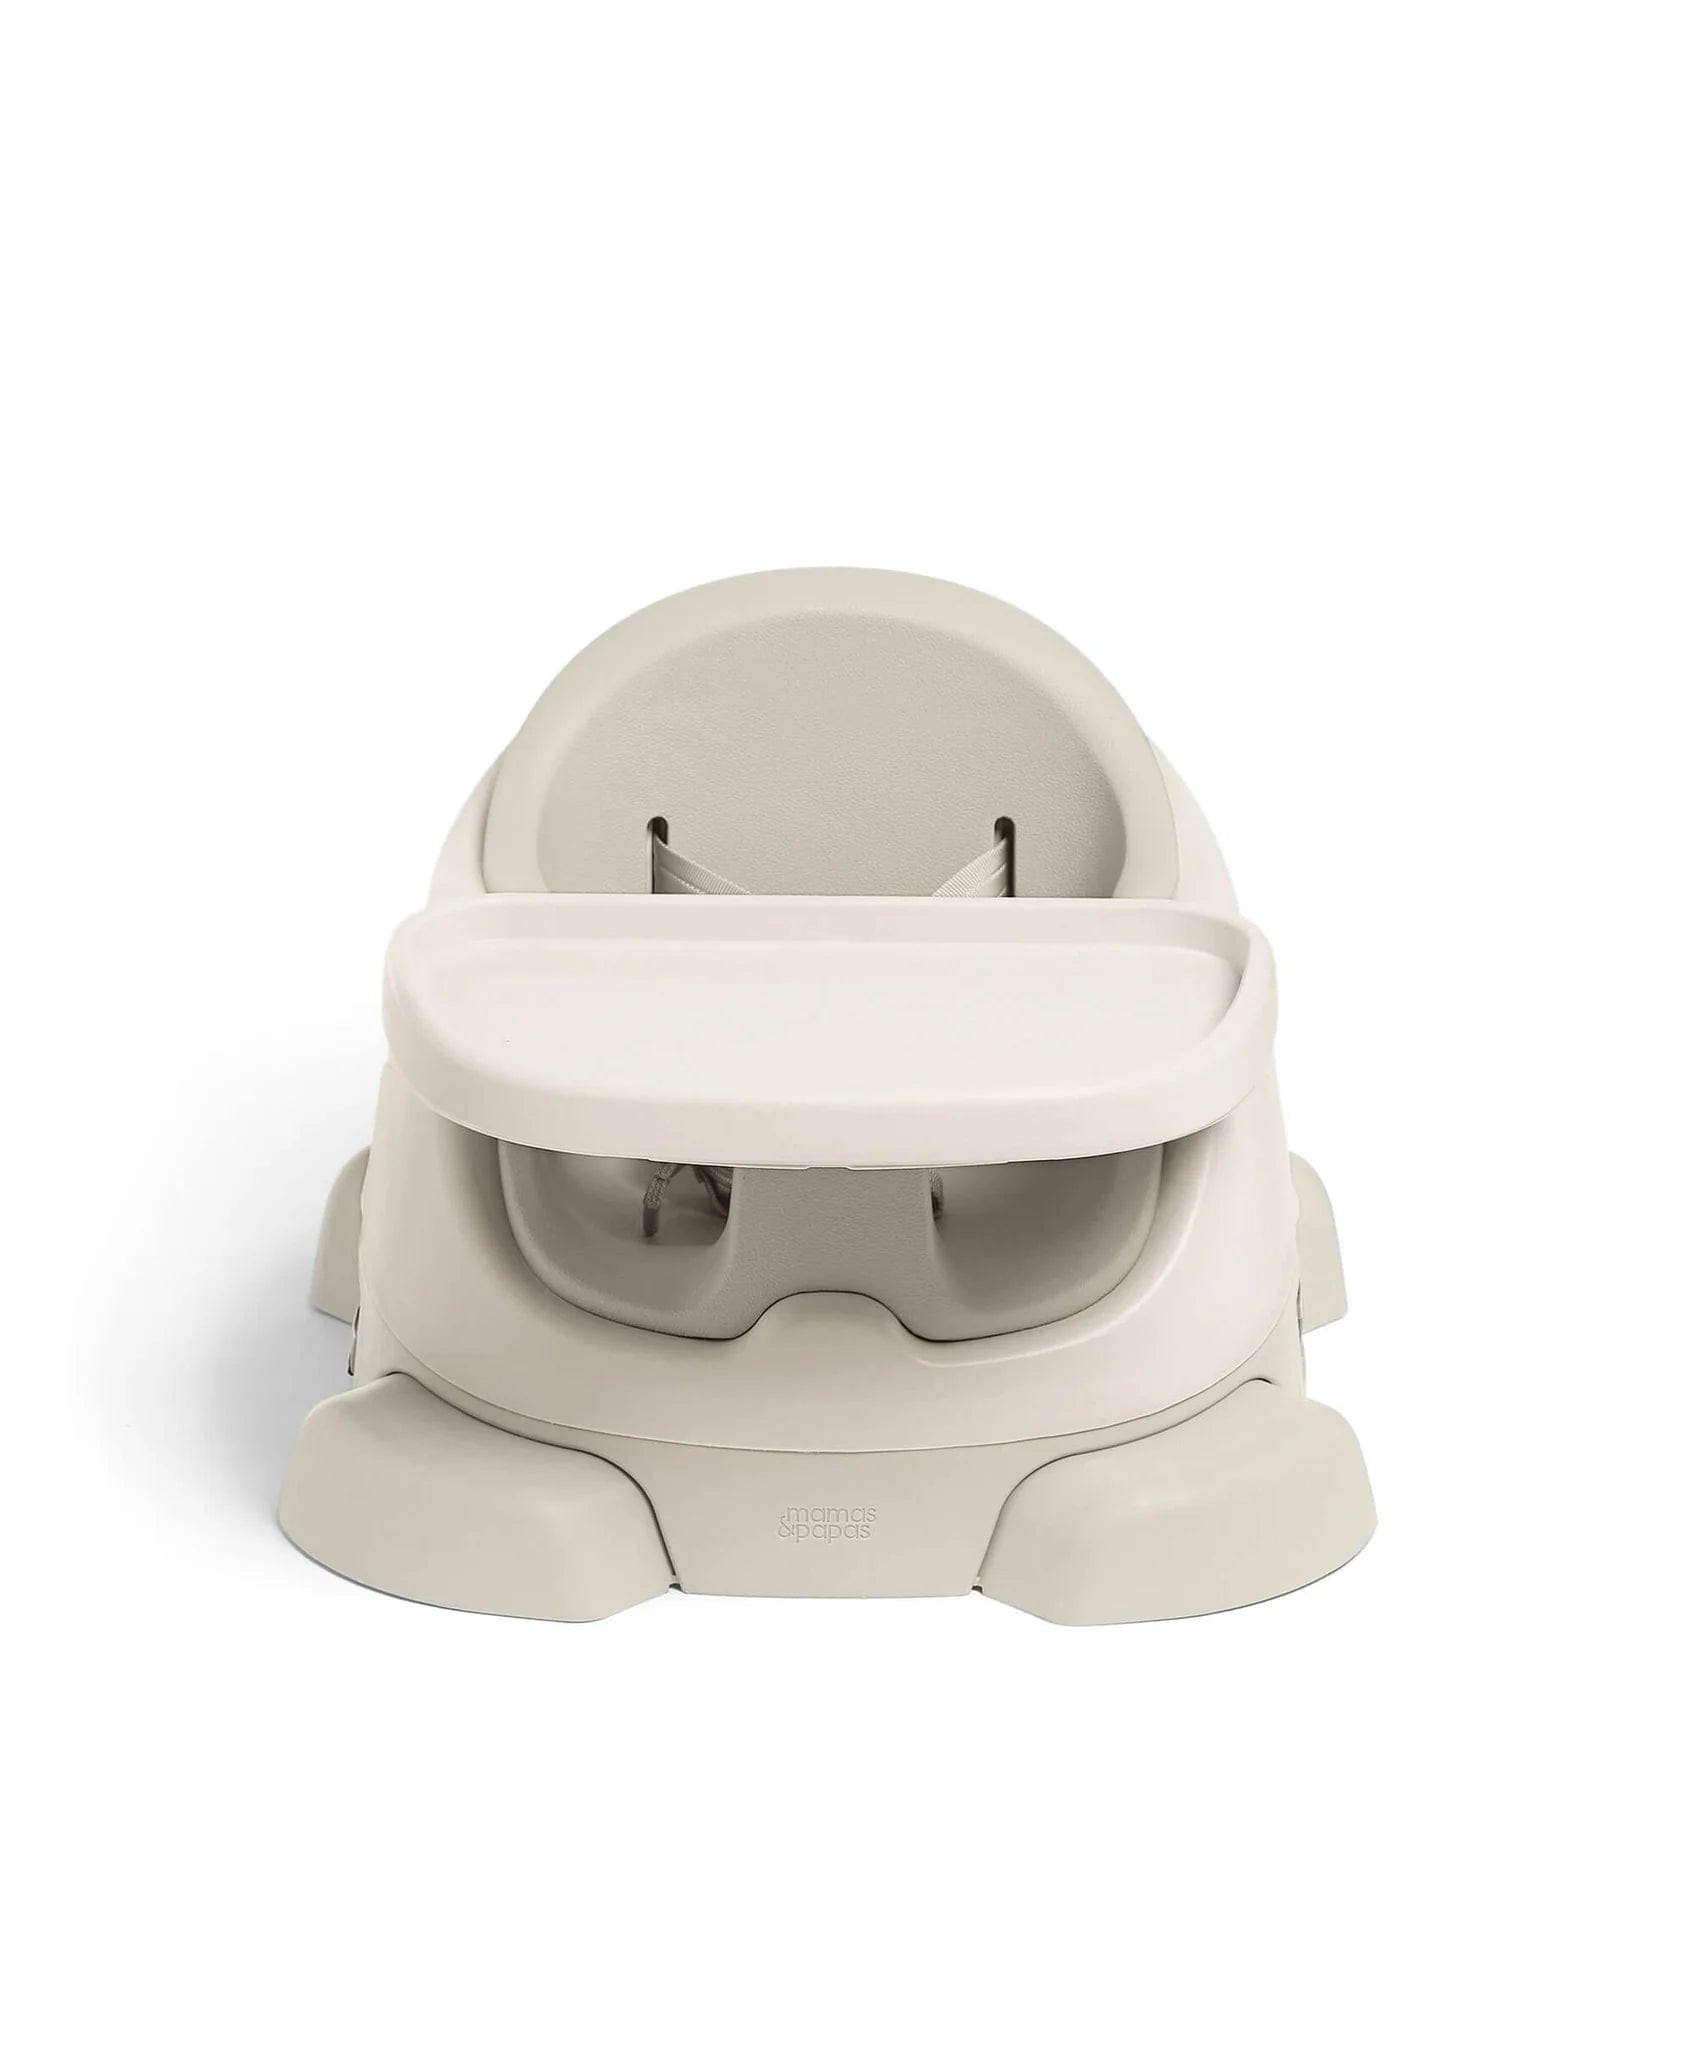 Mamas & Papas baby low chairs Mamas & Papas Bug 3-in-1 Floor & Booster Seat with Activity Tray - Clay 98681CL00